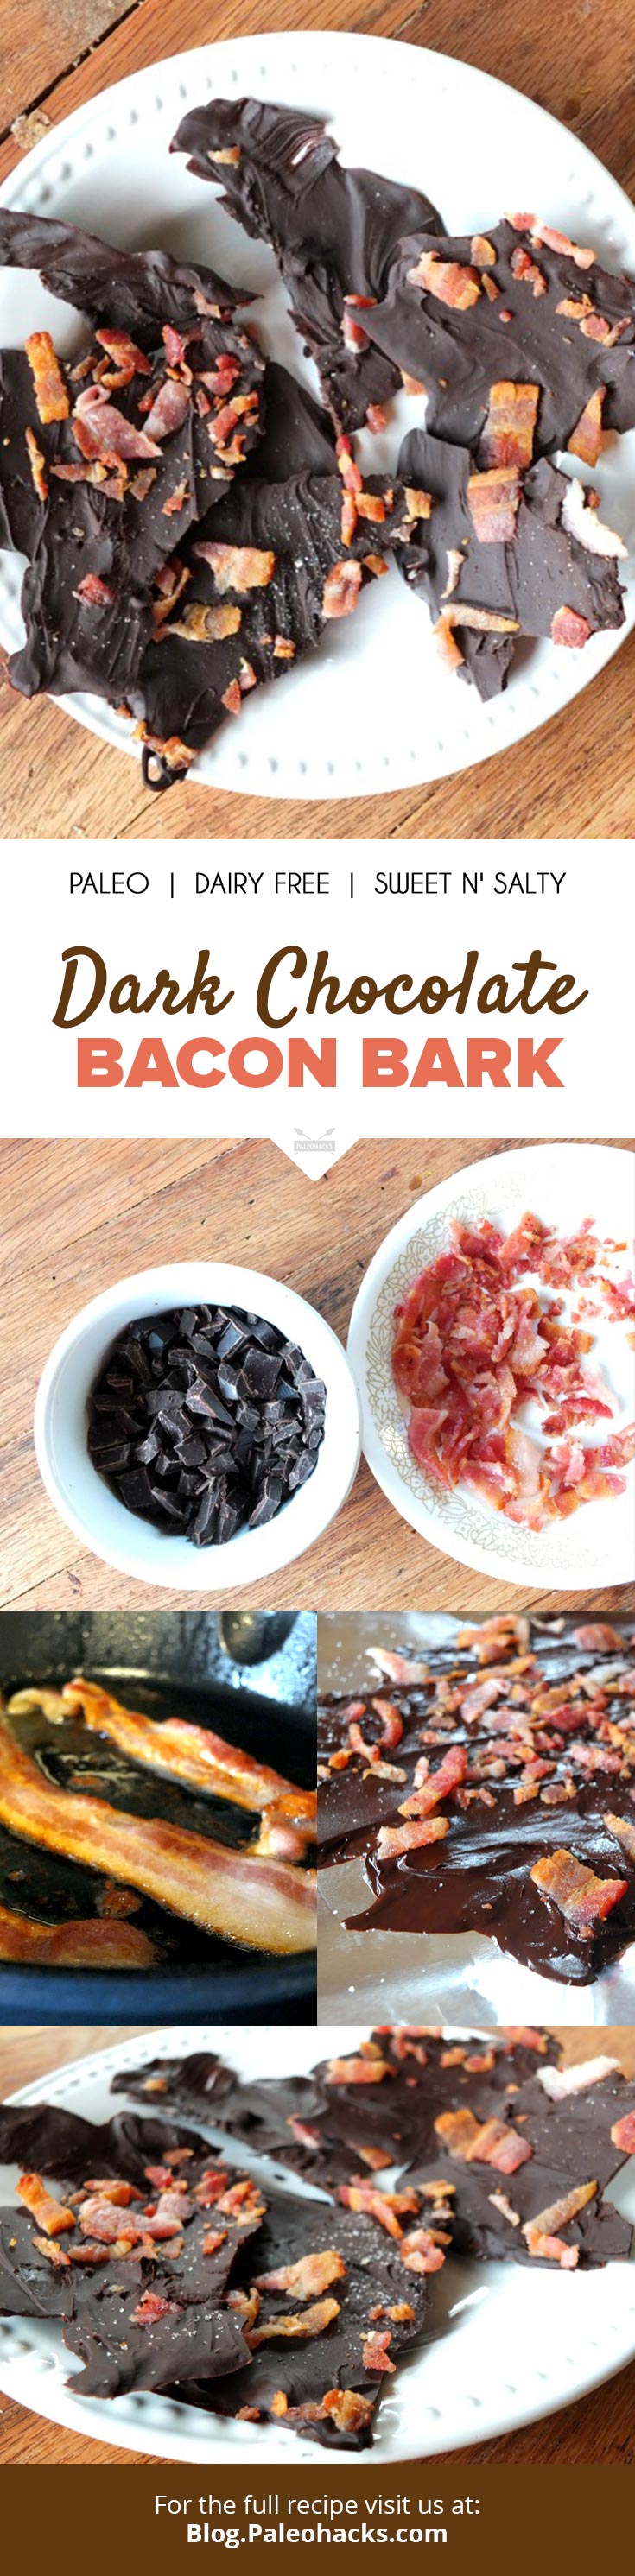 Crisp and salty bacon and sweet, rich dark chocolate are a match made in heaven in this Paleo-friendly bacon bark recipe.